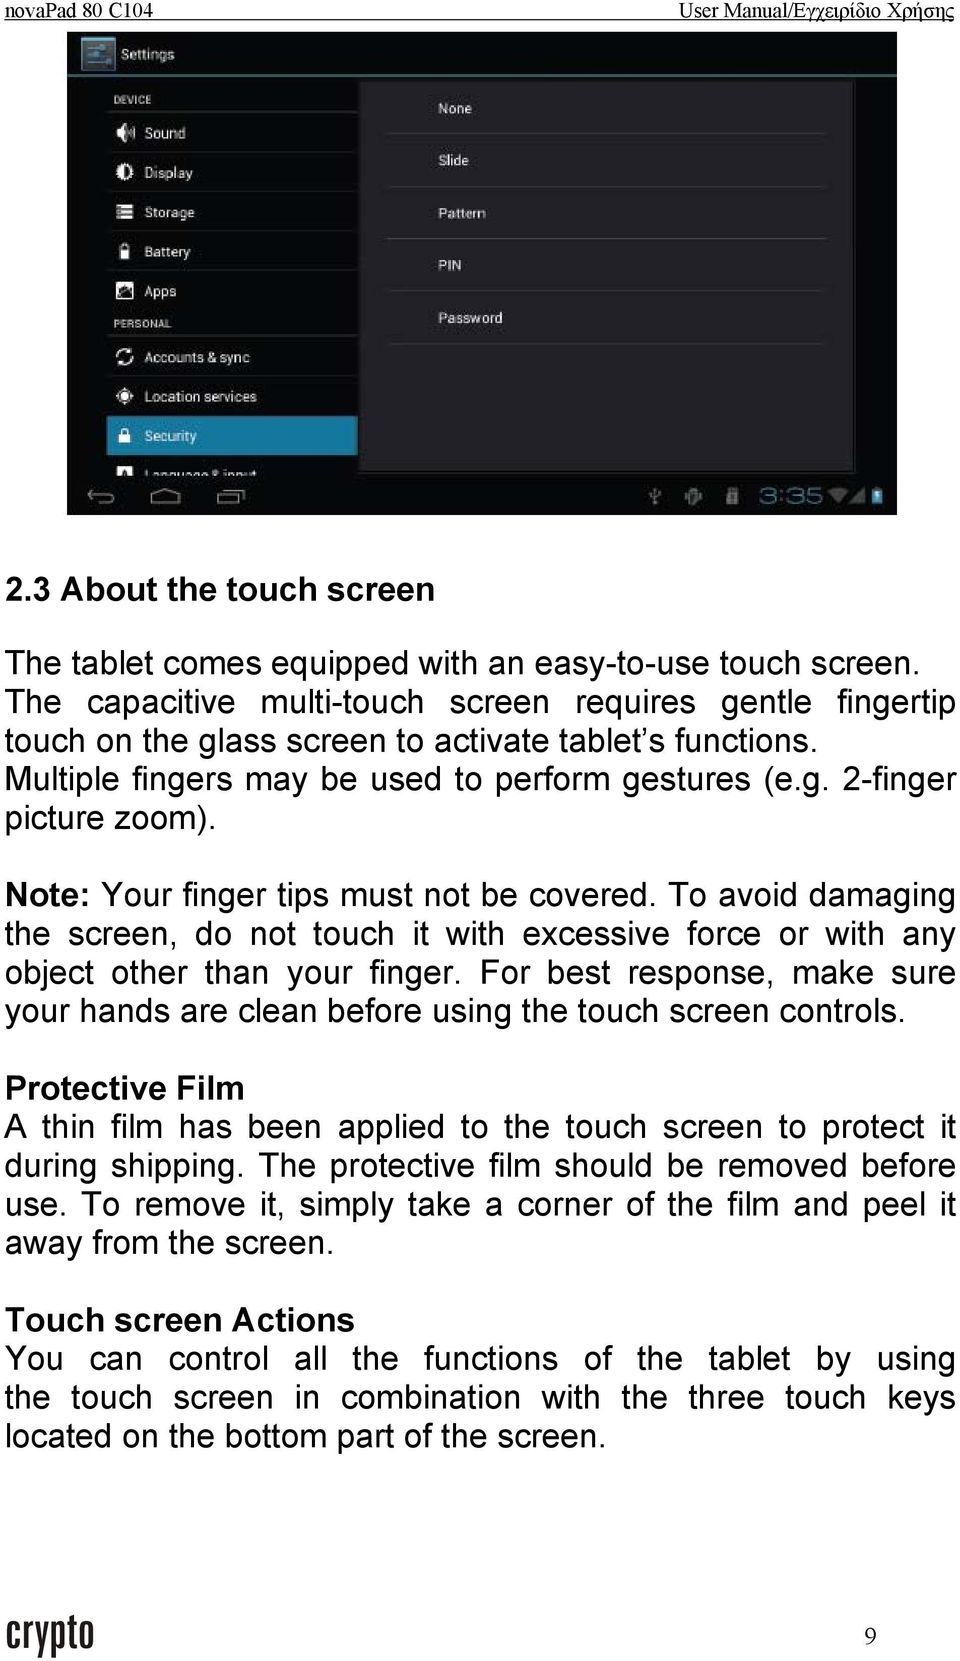 Note: Your finger tips must not be covered. To avoid damaging the screen, do not touch it with excessive force or with any object other than your finger.